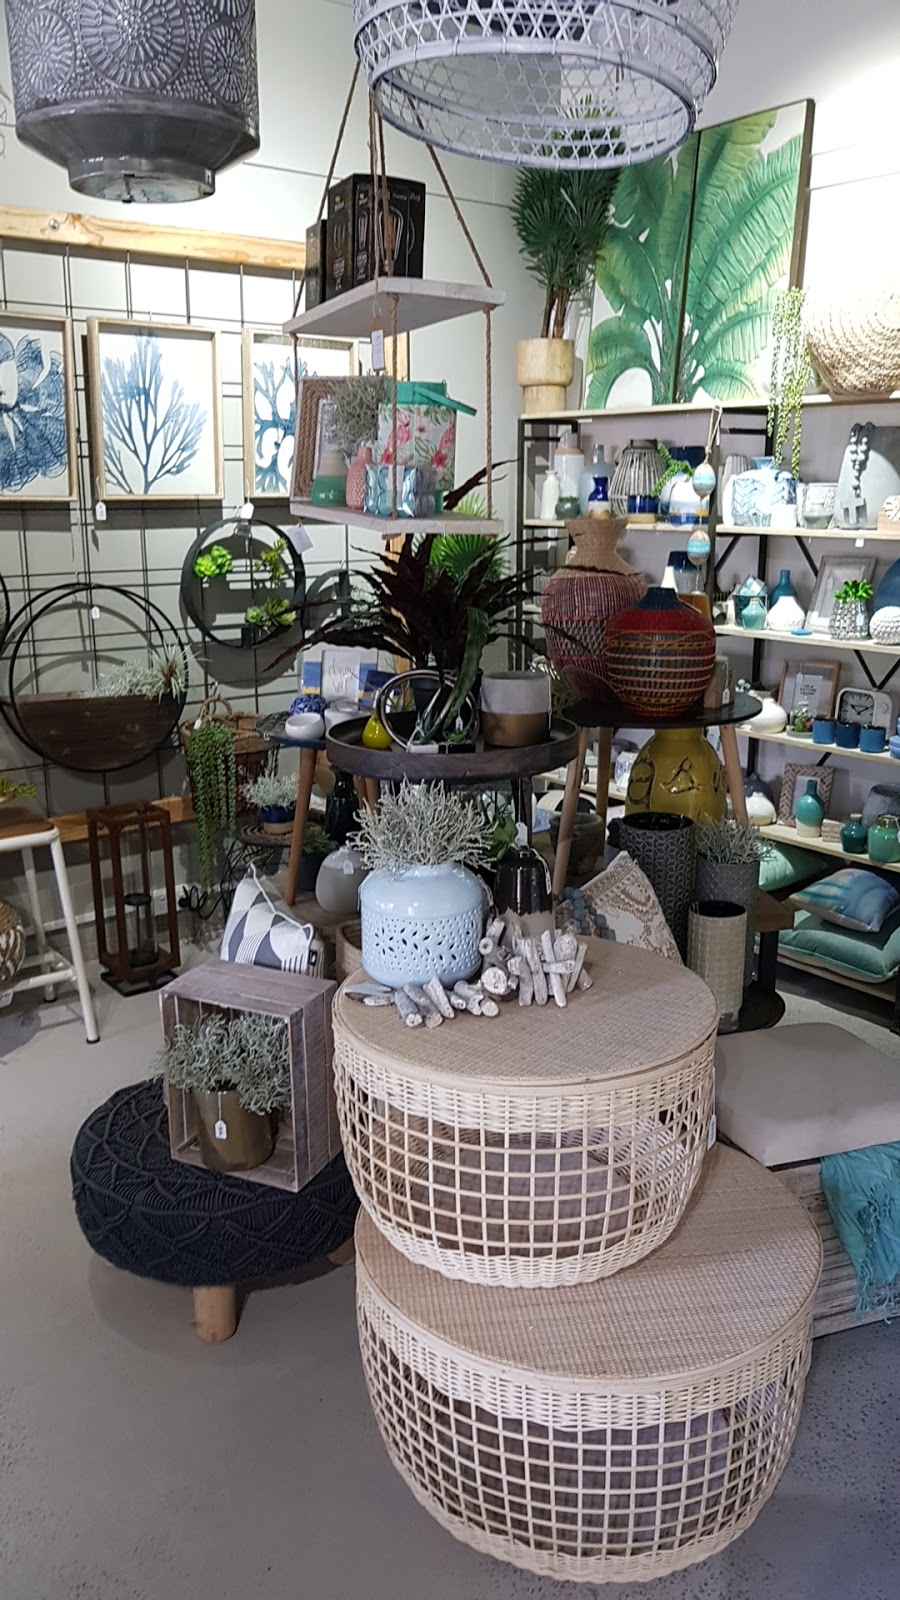 Love Homewares | home goods store | shop 11/345 Lawrence Hargrave Dr, Thirroul NSW 2515, Australia | 0401408873 OR +61 401 408 873